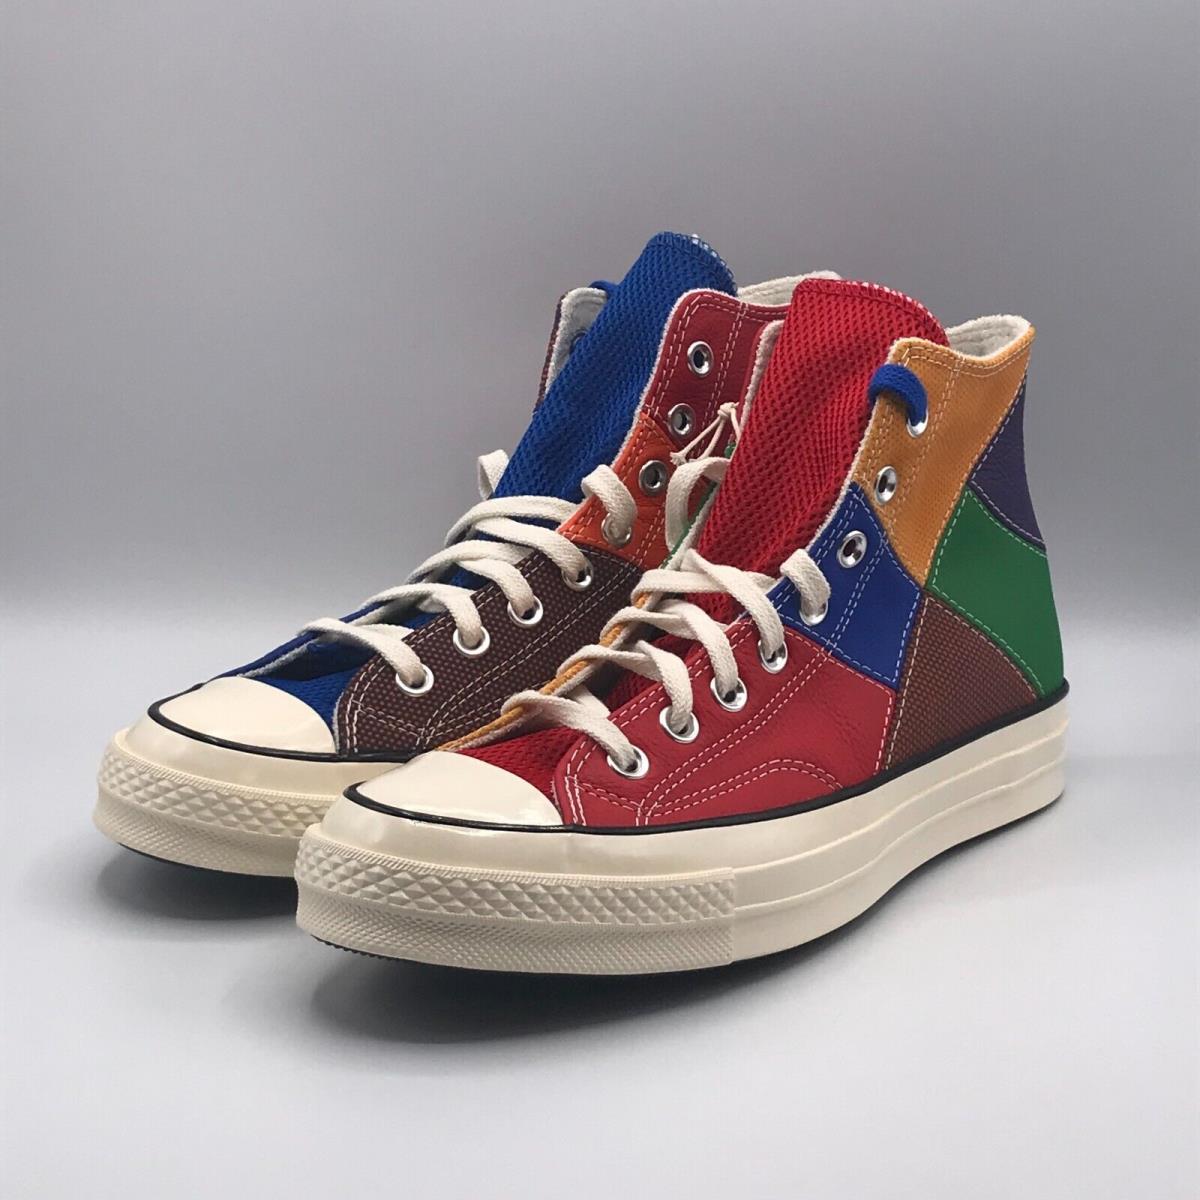 Converse Shoes Mens Size 10.5 Chuck 70 Hi Nba 75th Anniversary Blue Red Sneakers